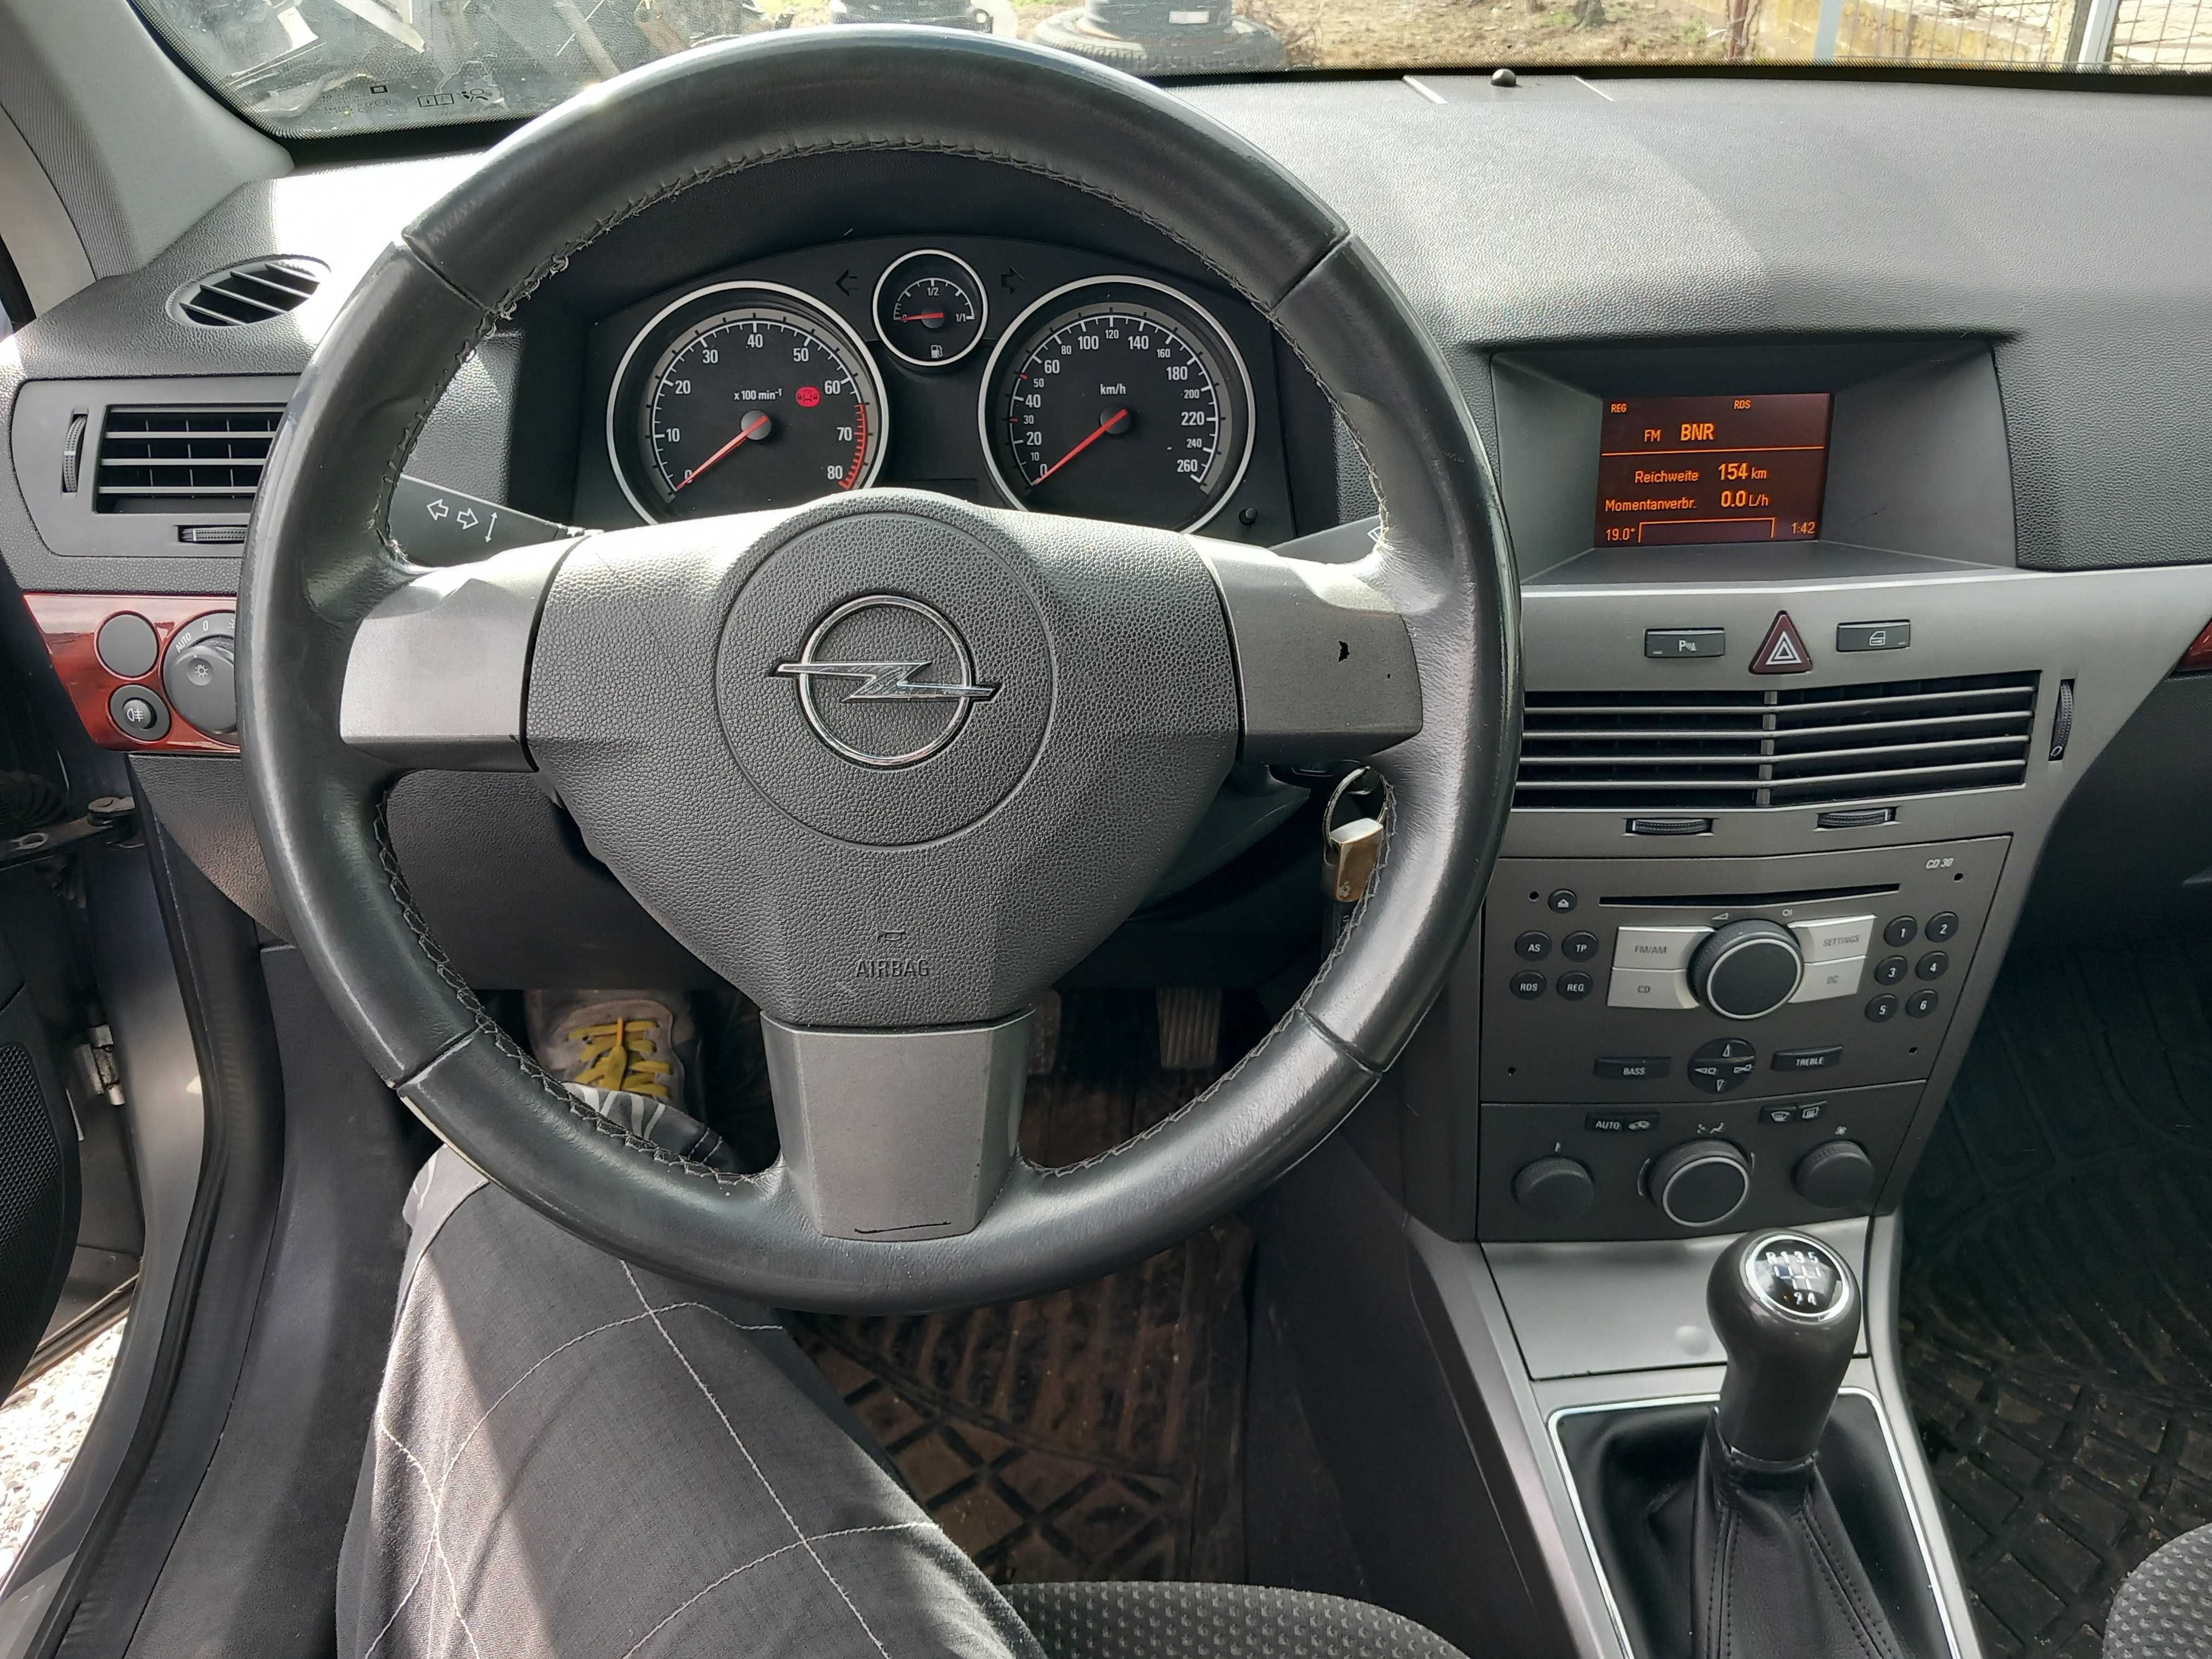 Opel Astra H- 1.4 16v Twinport-90кс/2008/- на части